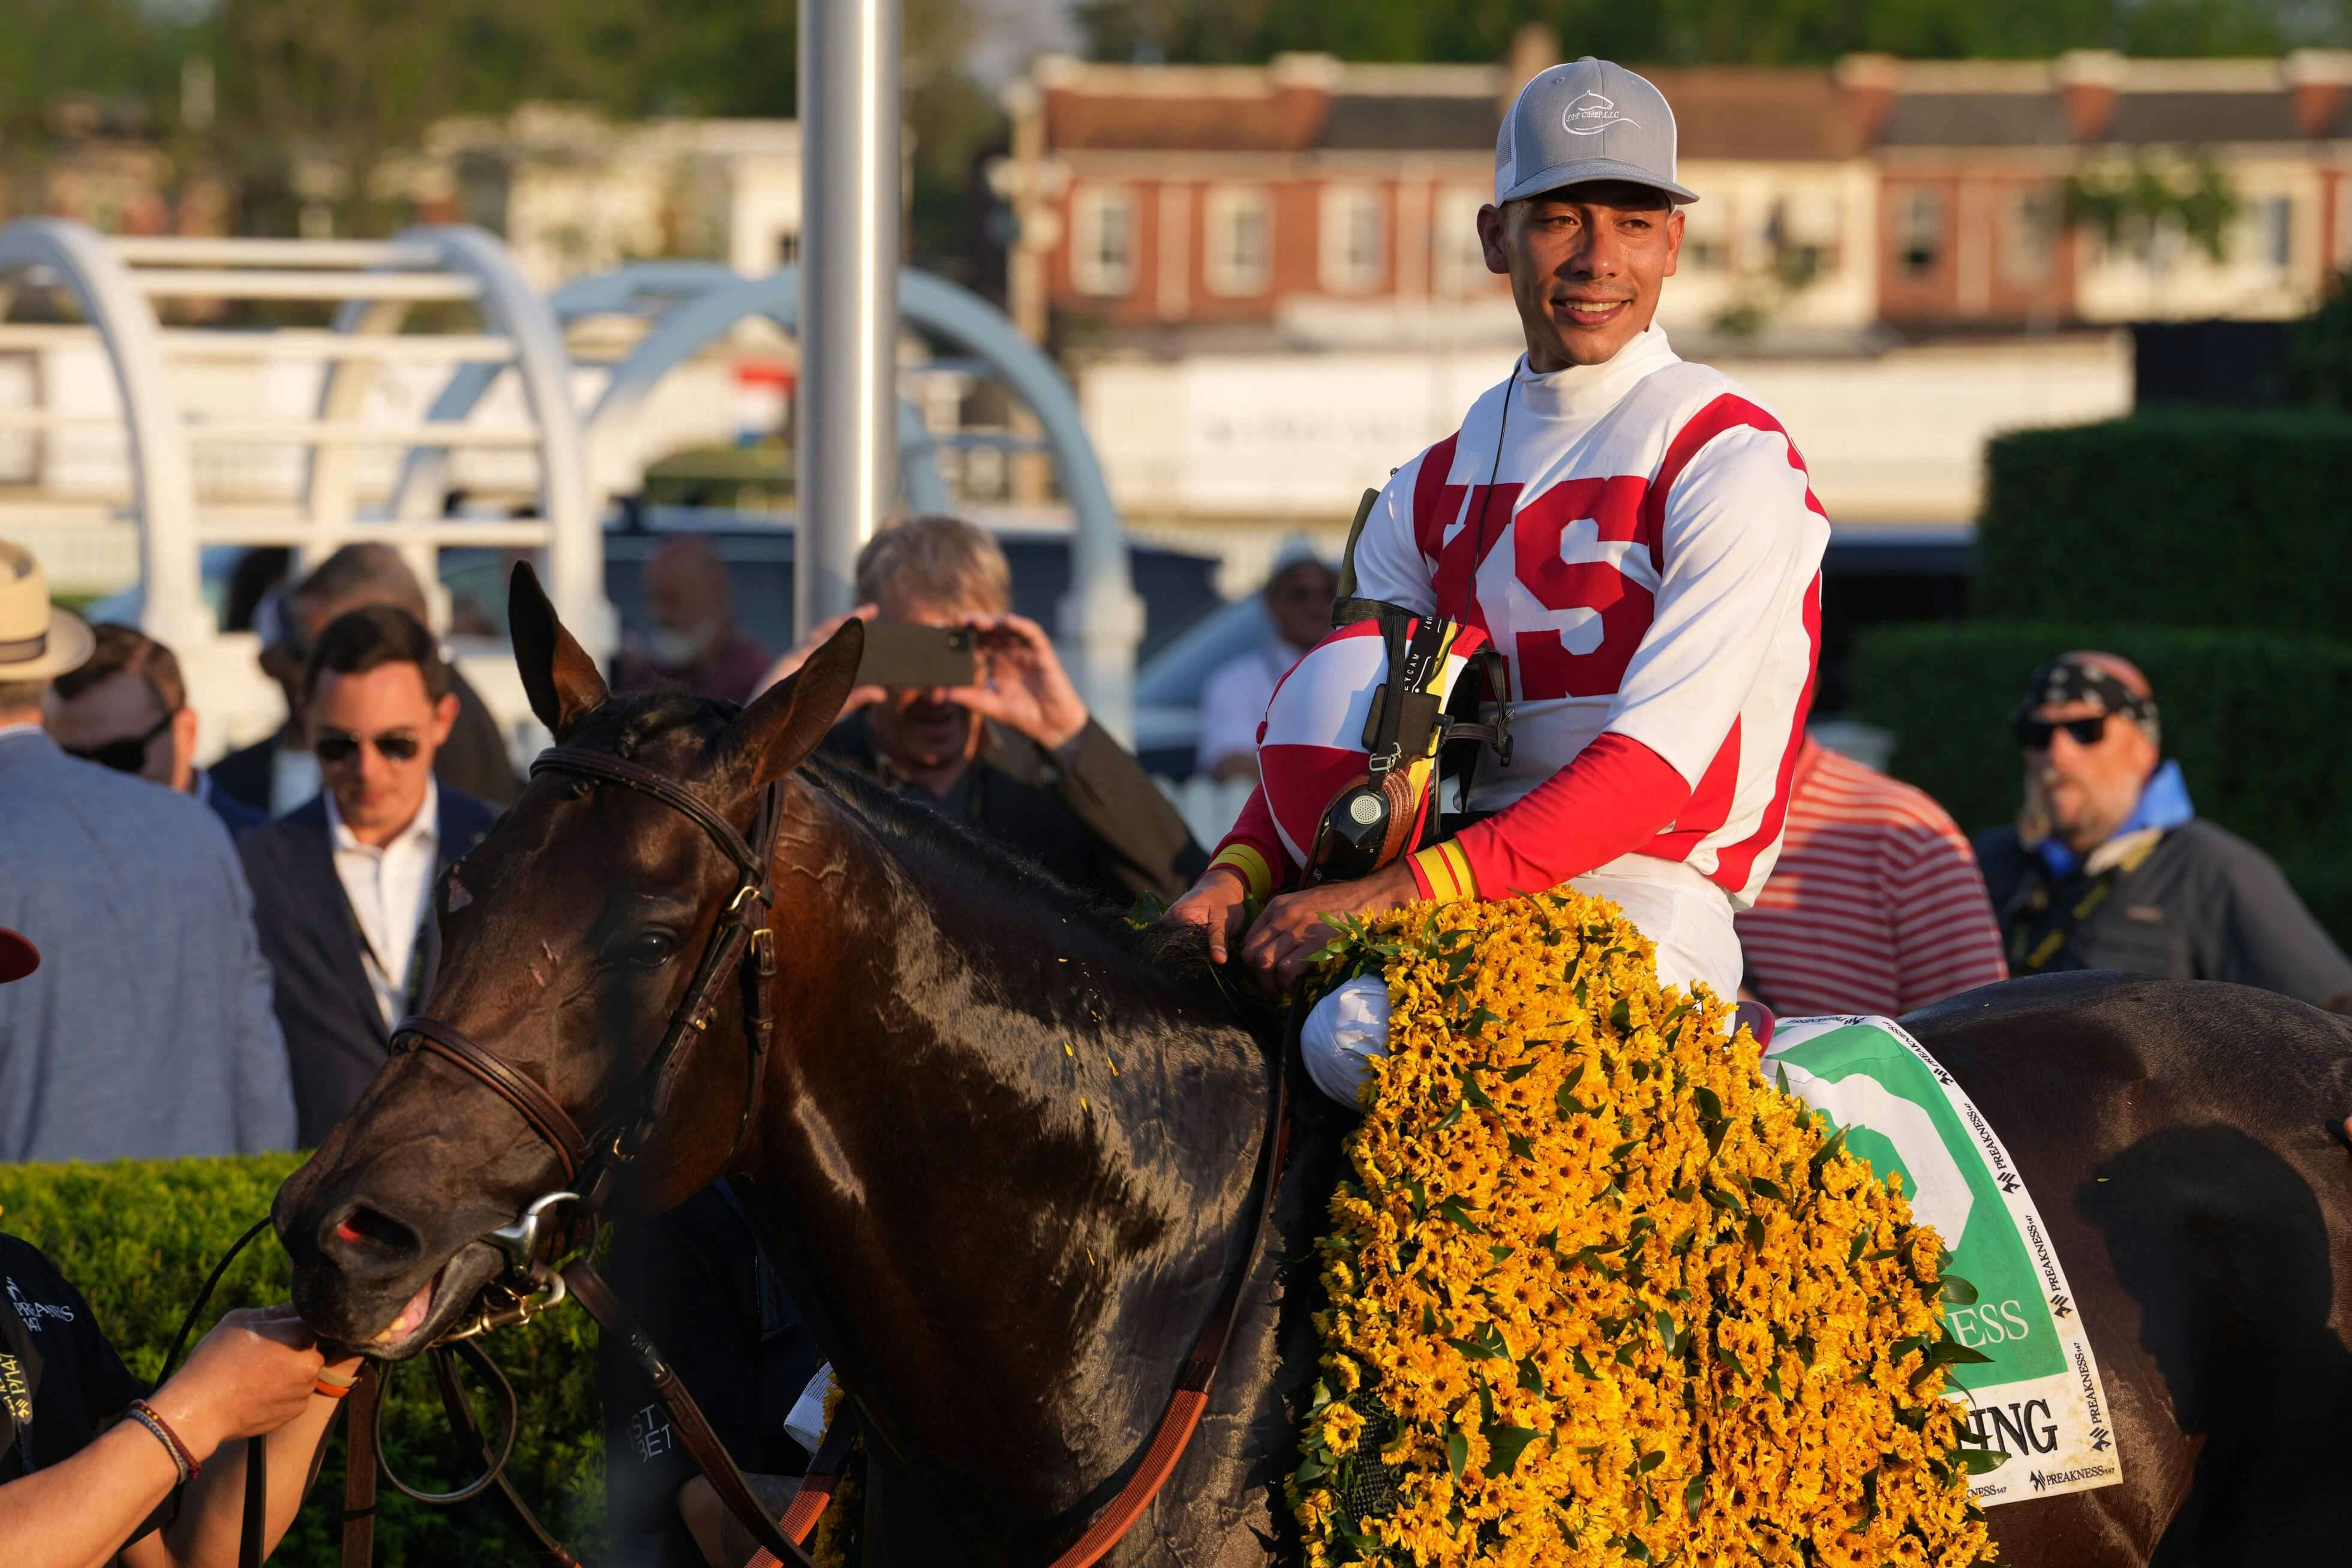 Early Voting jockey Jose Ortiz aboard in the winners circle after the Preakness Stakes at Pimlico Race Course. Mandatory Credit: Mitch Stringer-USA TODAY Sports